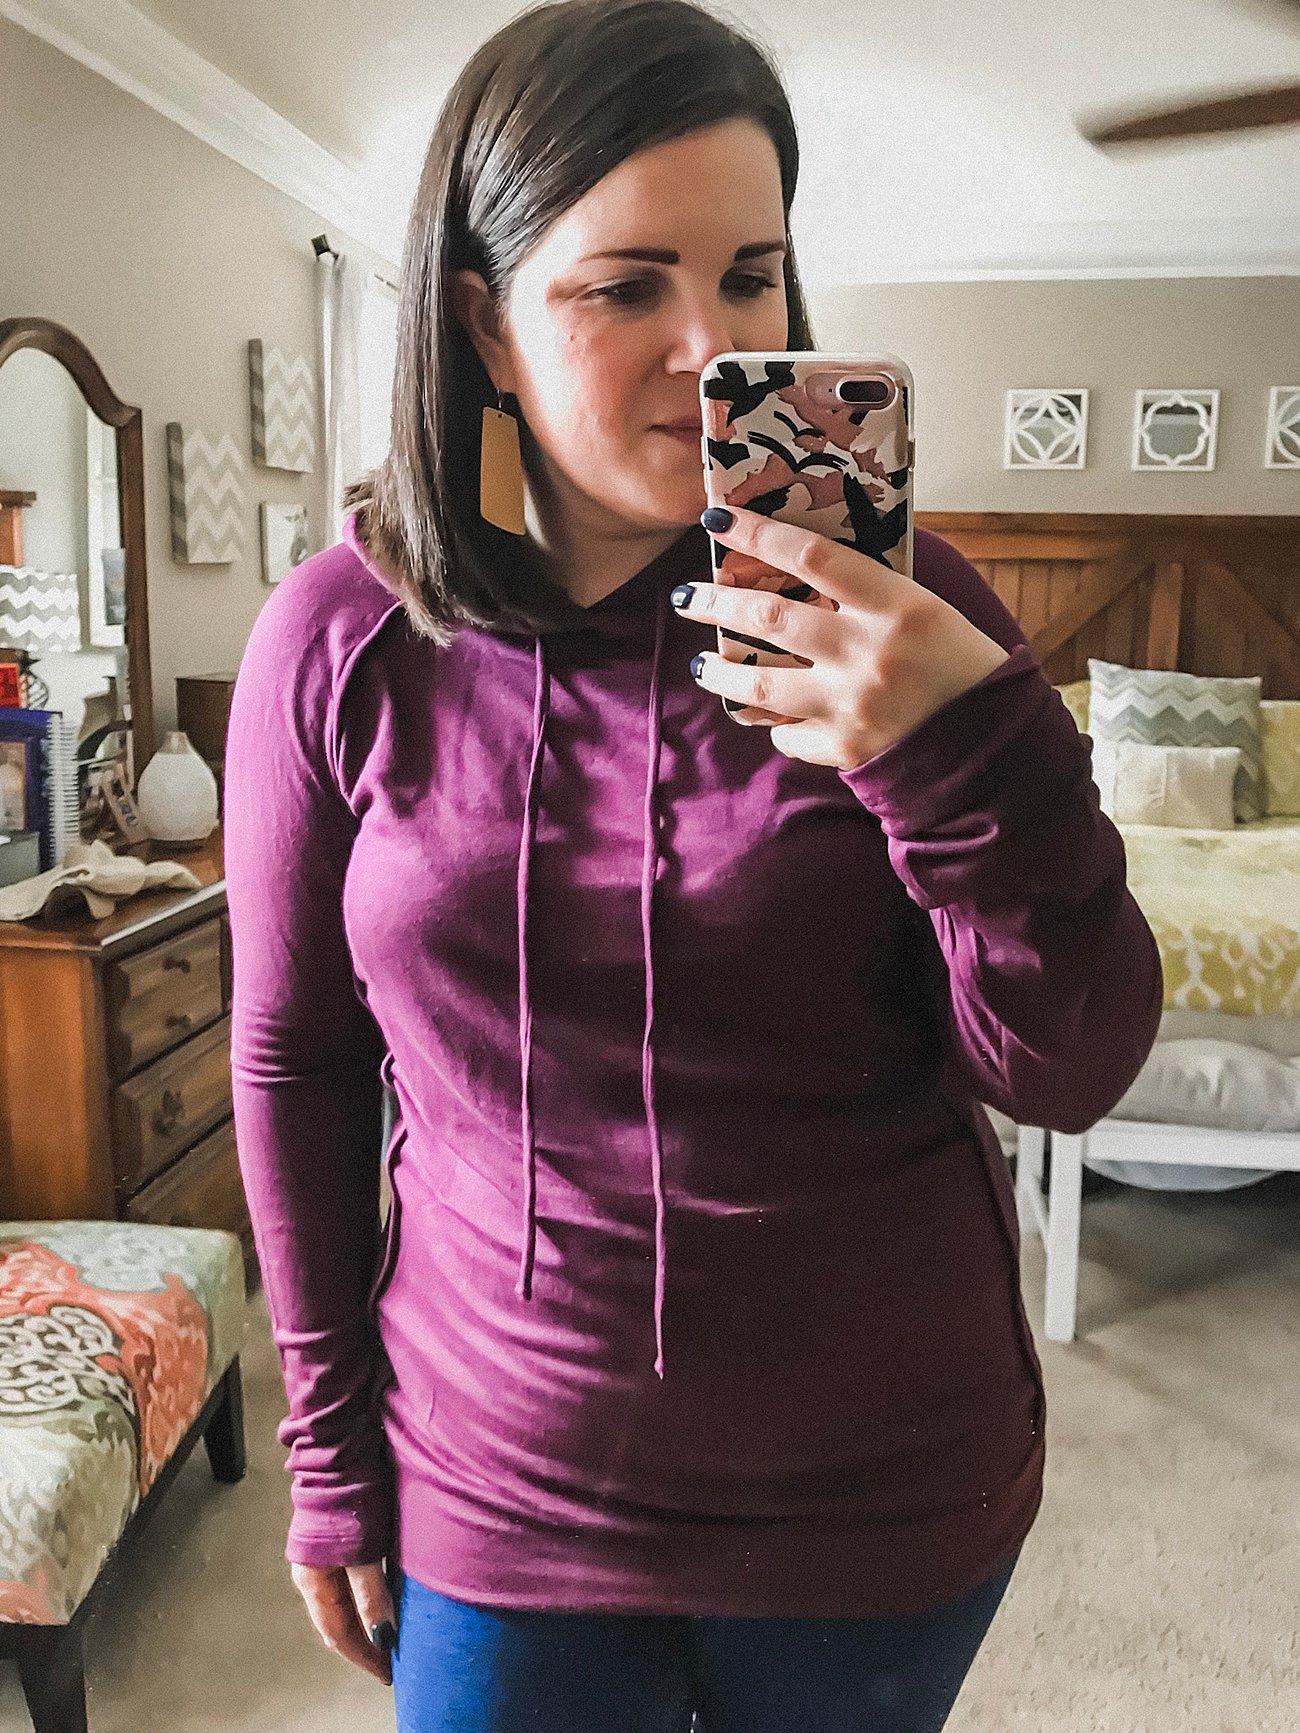 LAILA JAYDE - Quinne Knit Hoodie - SIZE: XL - $58 - Athleisure & Activewear Stitch Fix Review (6)